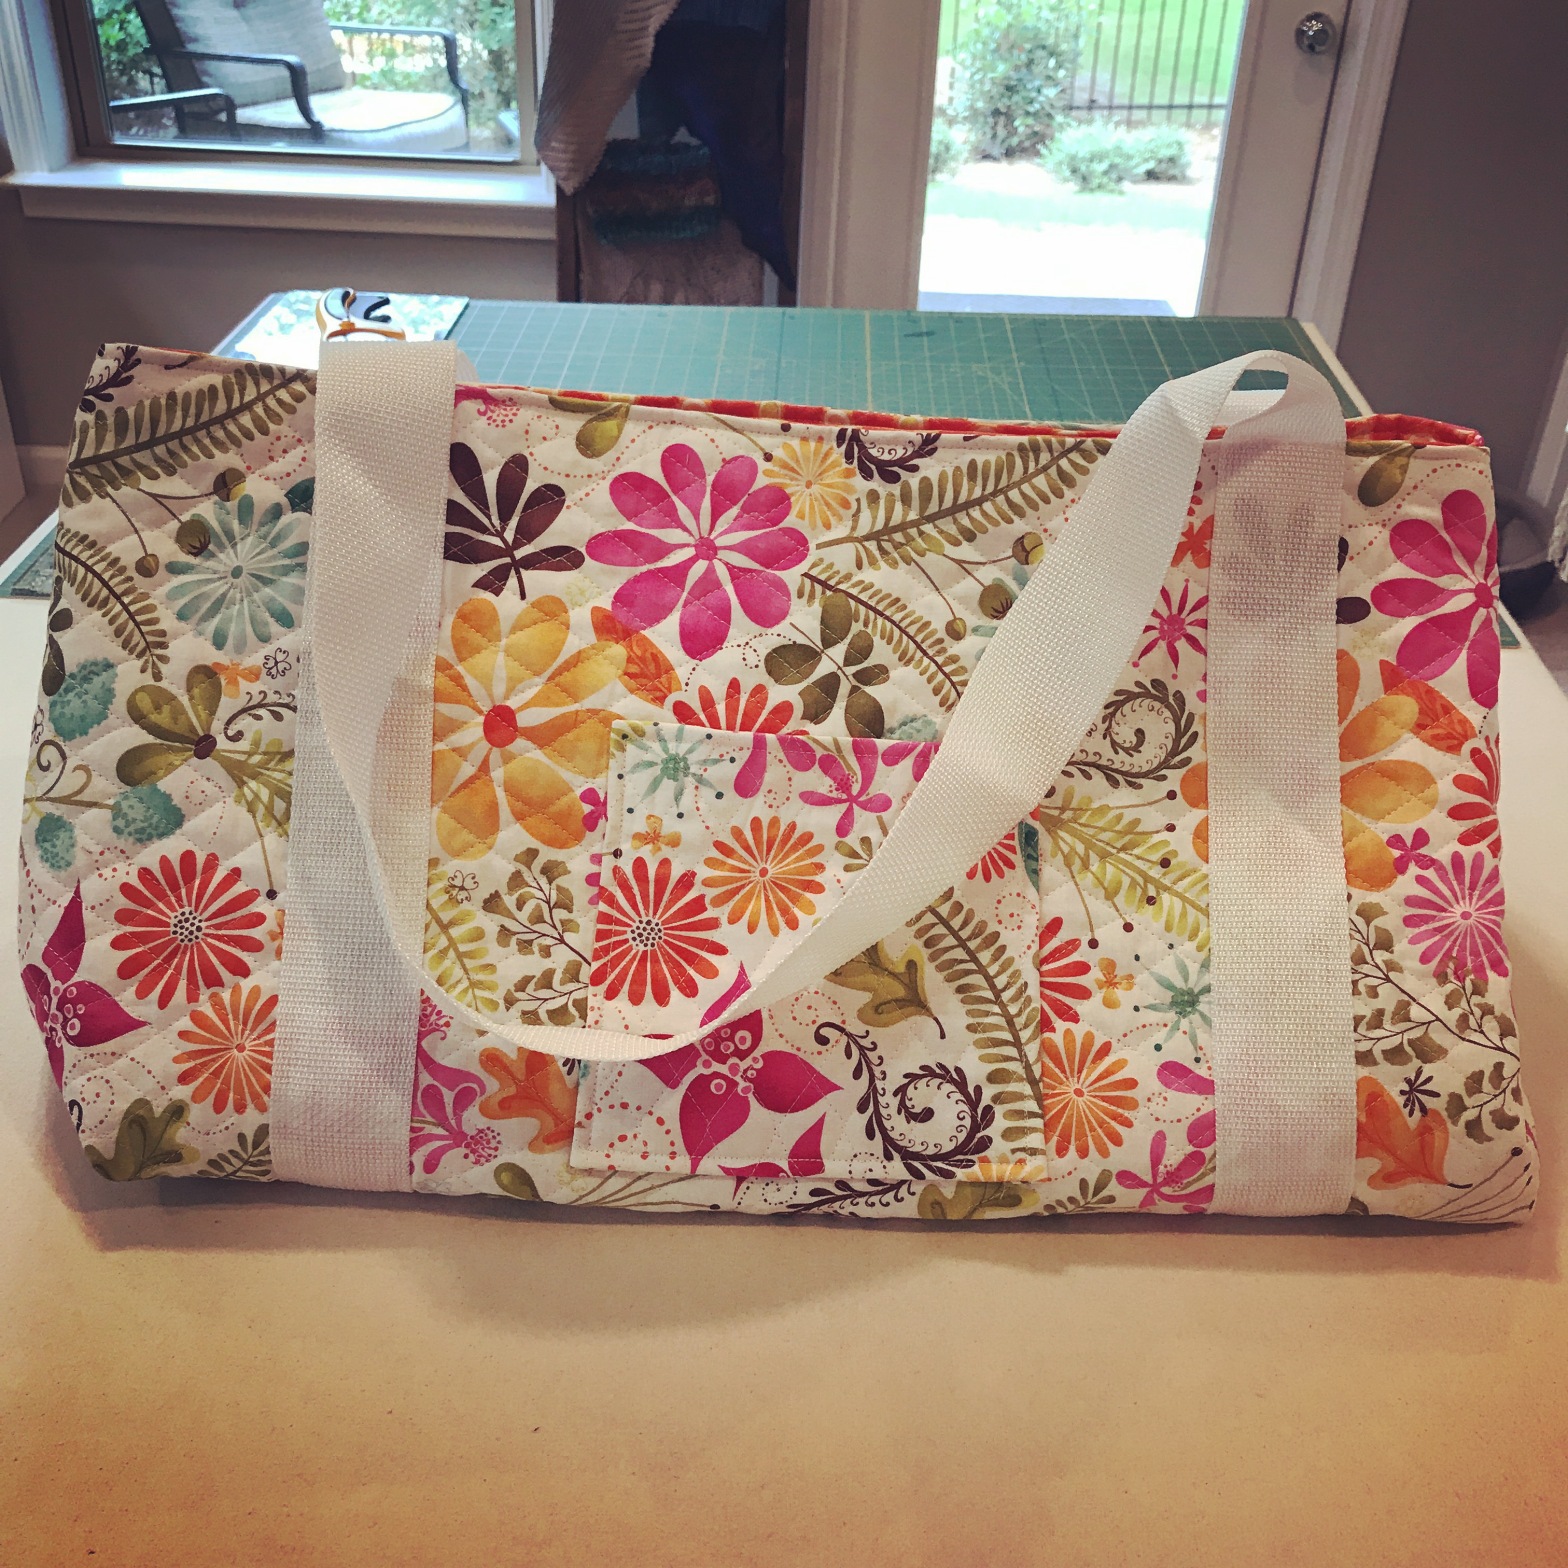 Big Duffle Bag using Pre Quilted Kate Spain fabric